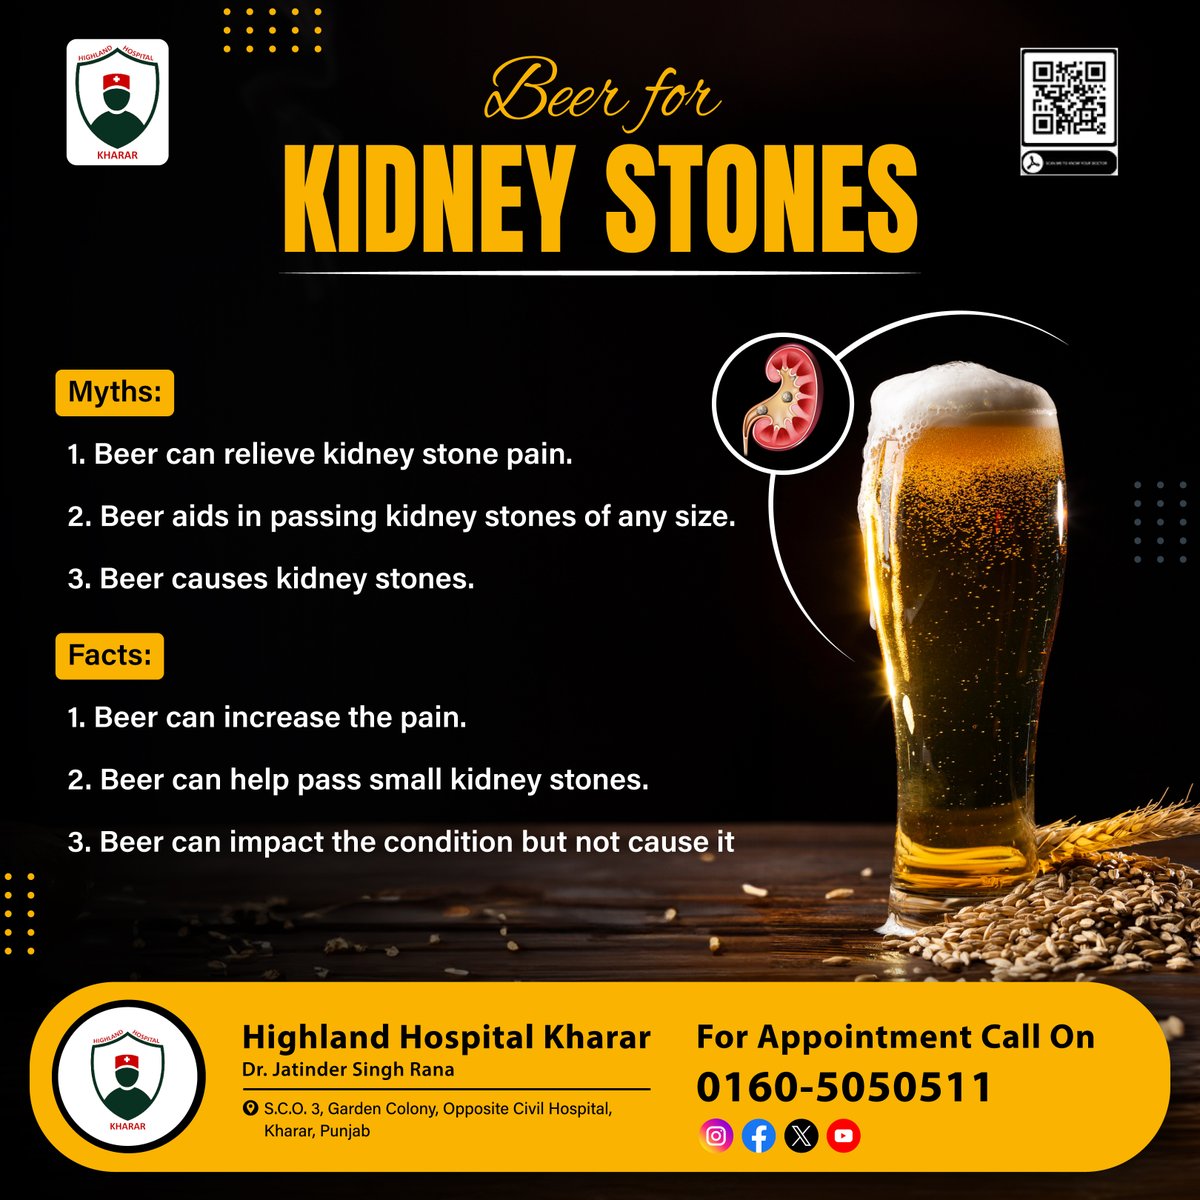 #Myth or #Fact? Does drinking #beer help with #kidneystones? We're busting myths and bringing you the facts. Follow us to learn more about kidney health!
.
#DonateBlood #Kharar #Mohali #DrJatinderSingh #Besthospital #beer #drinking #alcohol #MythBuster #highlandhospitalkharar